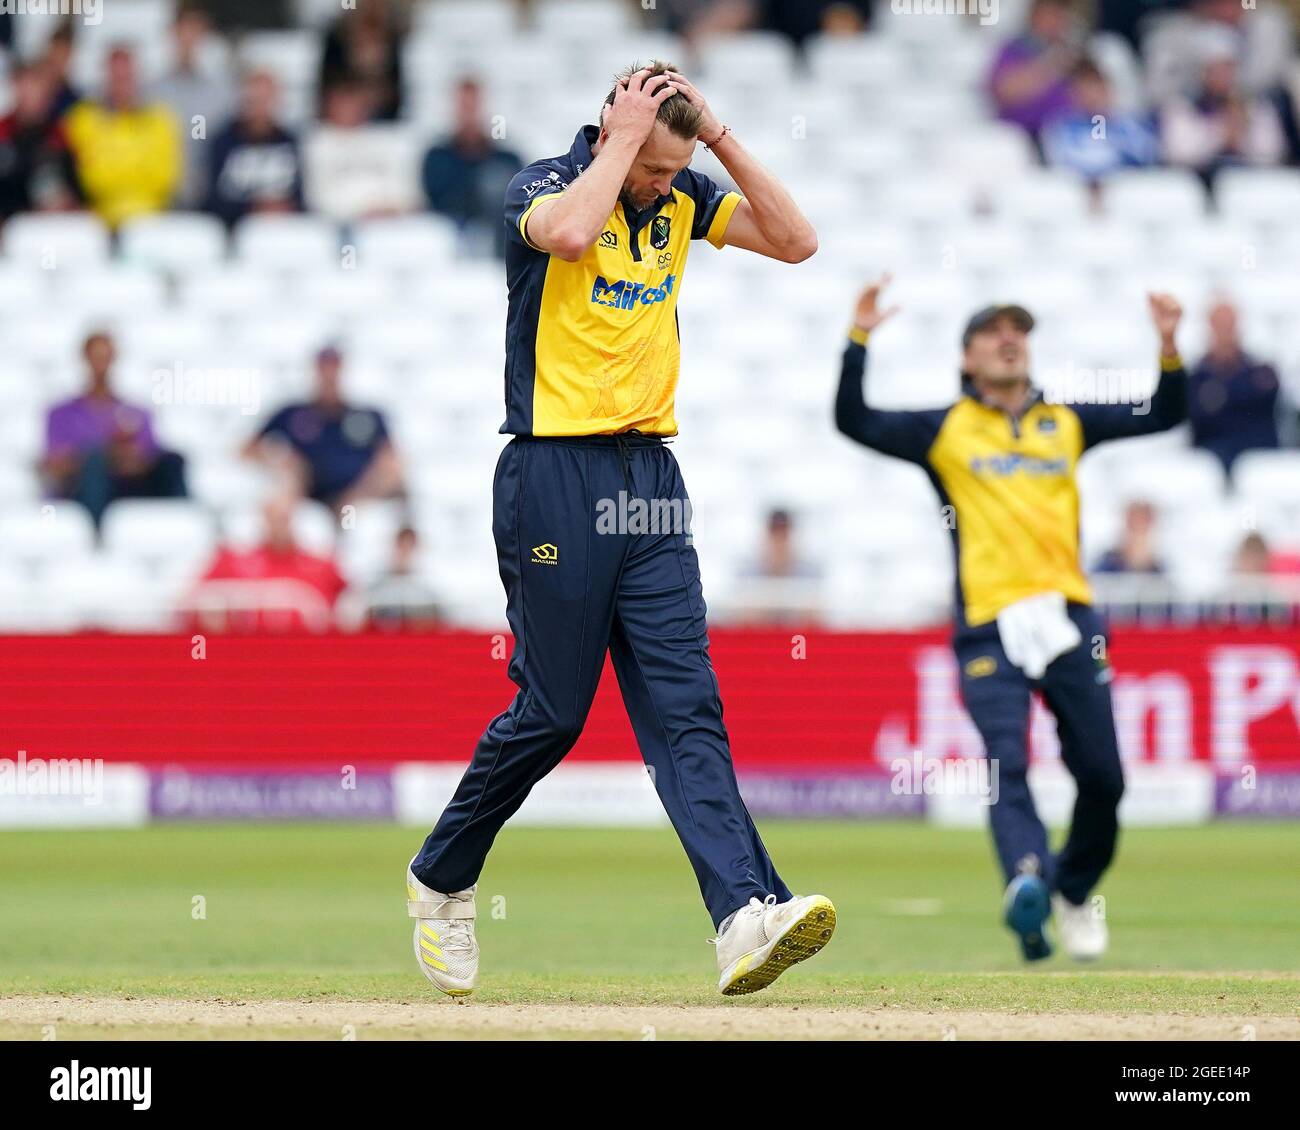 Glamorgan's Michael Hogan reacts during the Royal London One-Day Cup Final at Trent Bridge, Nottingham. Picture date: Thursday August 19, 2021. See PA story CRICKET Final. Photo credit should read: Zac Goodwin/PA Wire. RESTRICTIONS: No commercial use without prior written consent of the ECB. Still image use only. No moving images to emulate broadcast. Editorial use only. No removing or obscuring of sponsor logos. Stock Photo